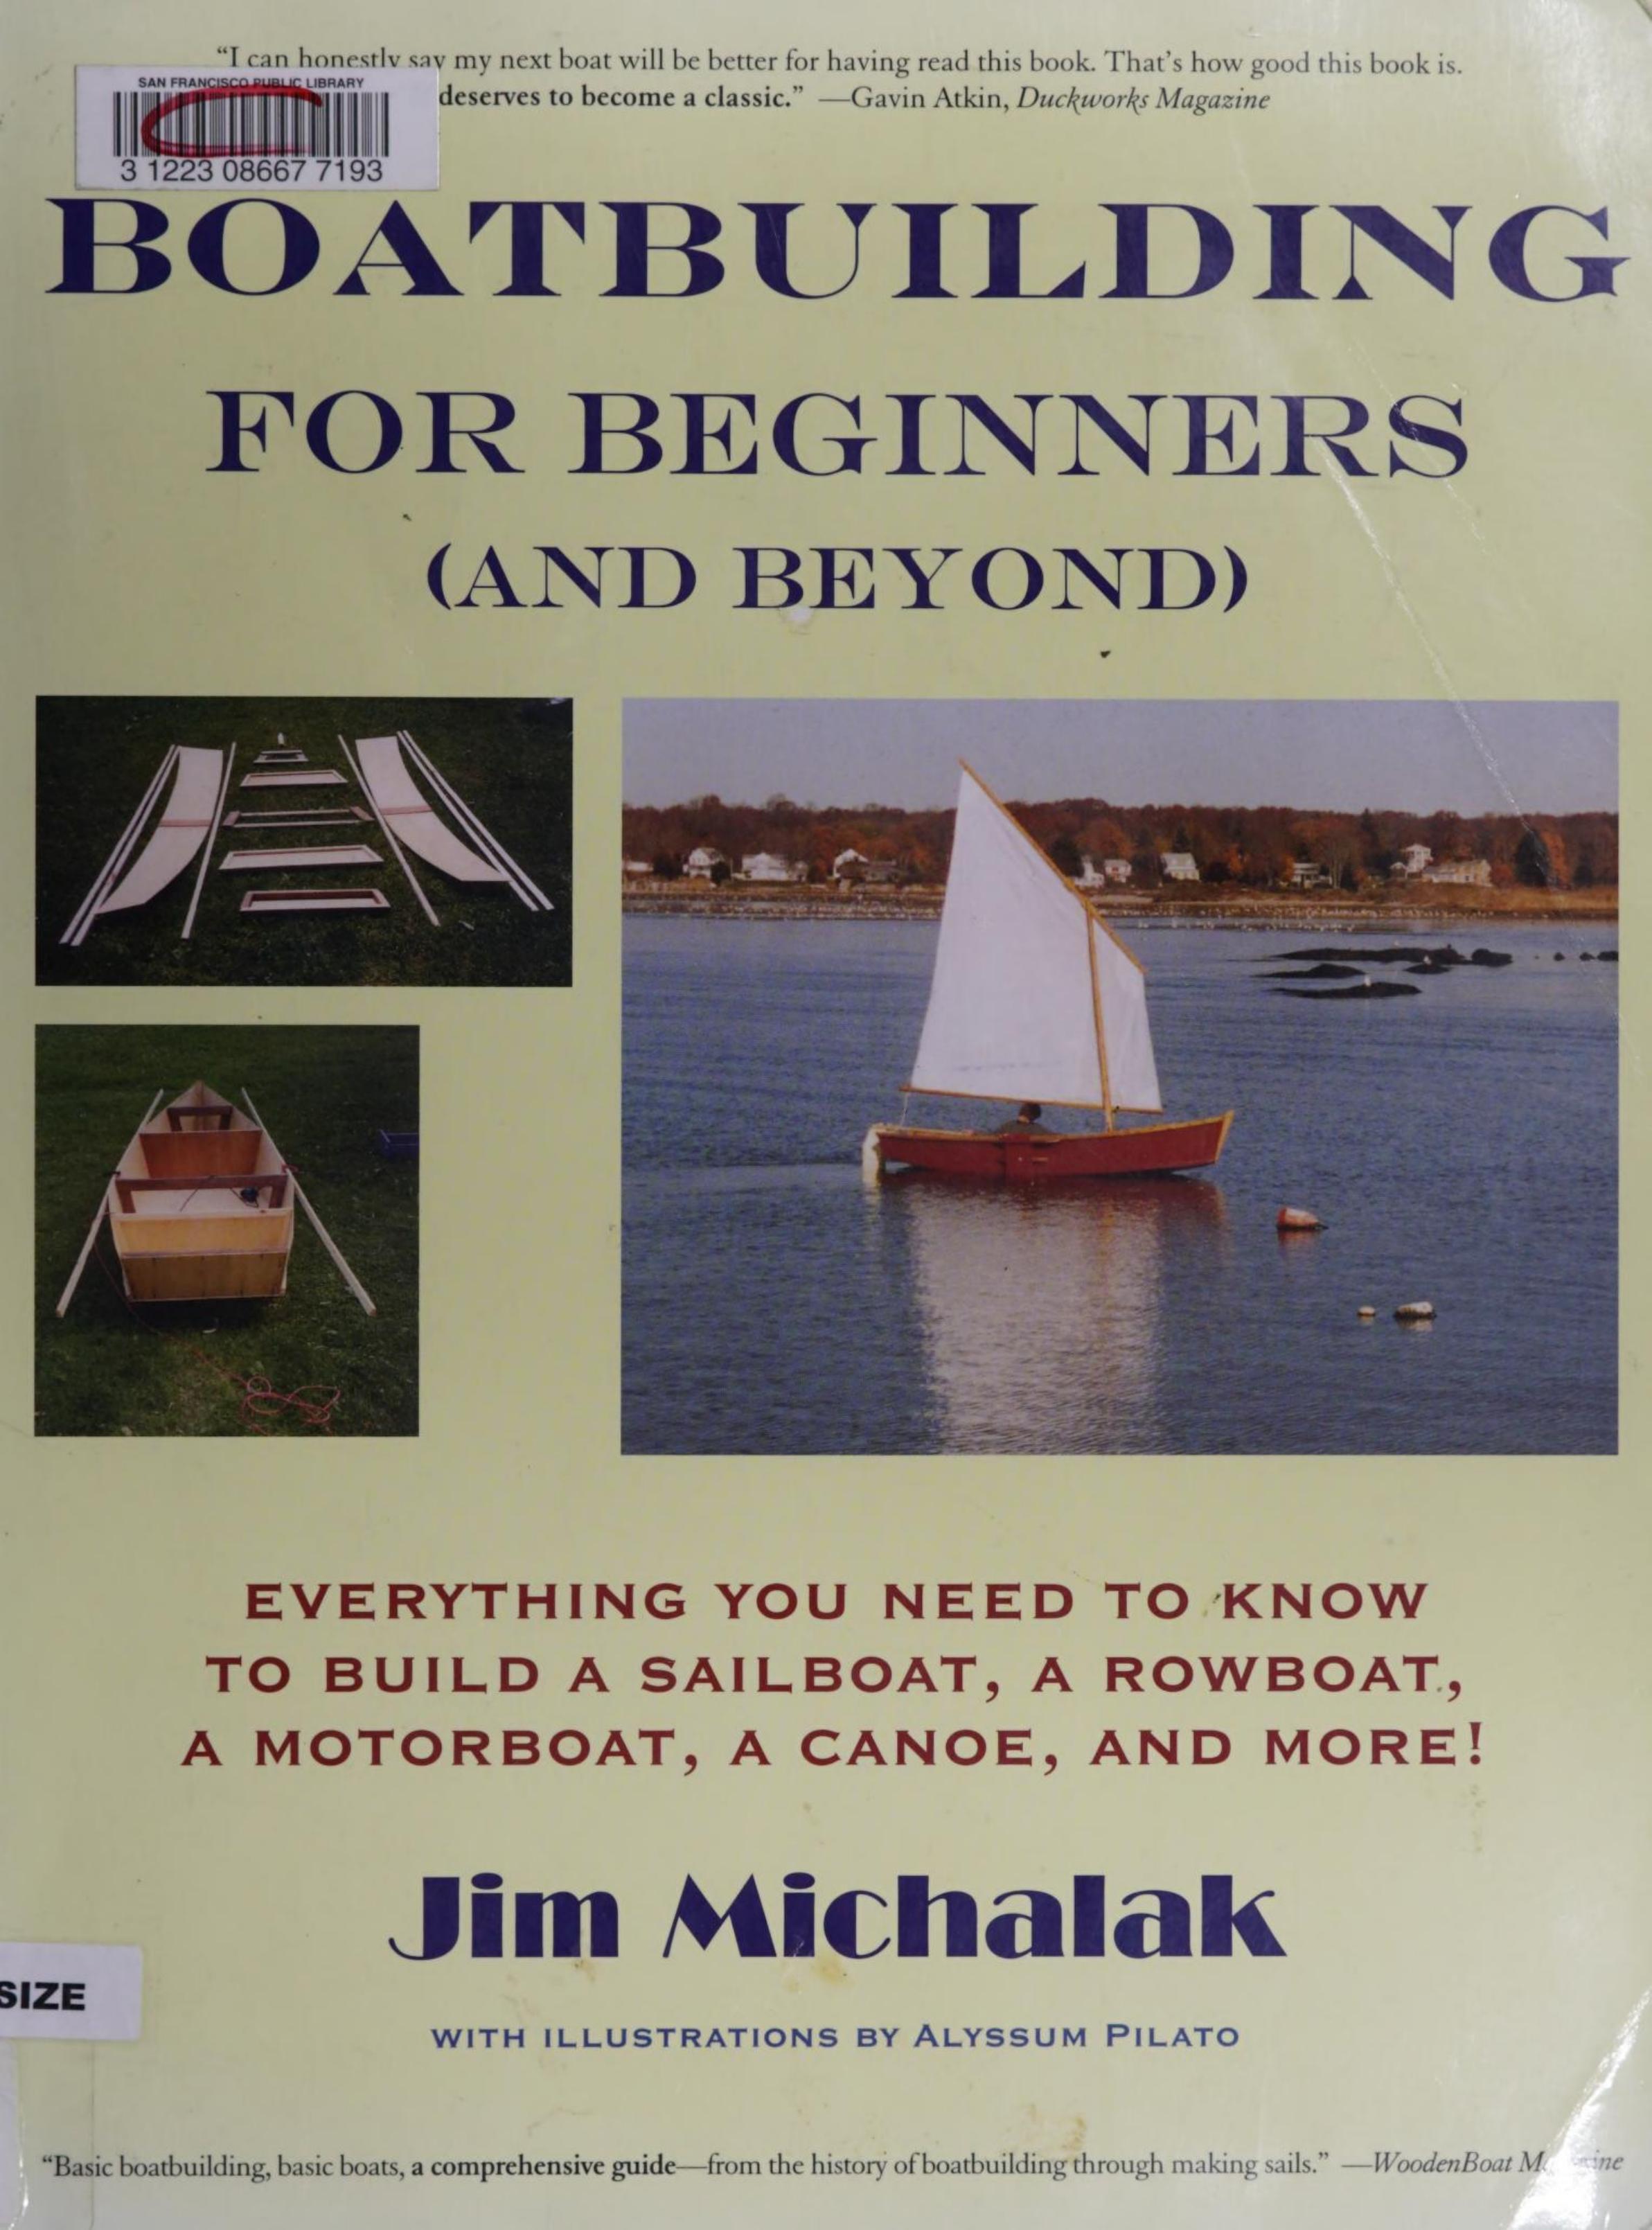 Boatbuilding for Beginners (and Beyond) by Jim Michalak